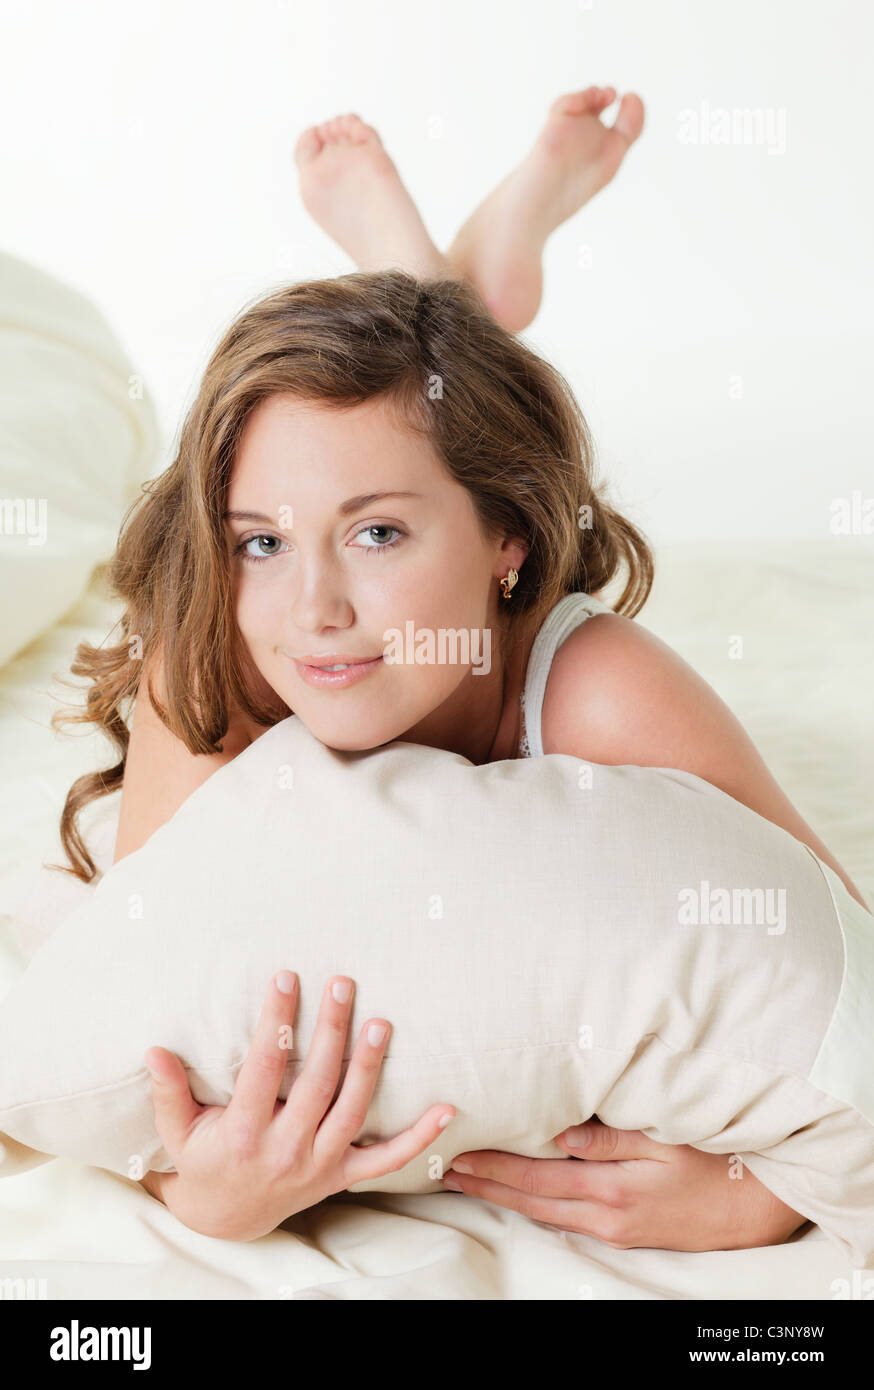 Pretty young woman in bed embracing pillow Stock Photo